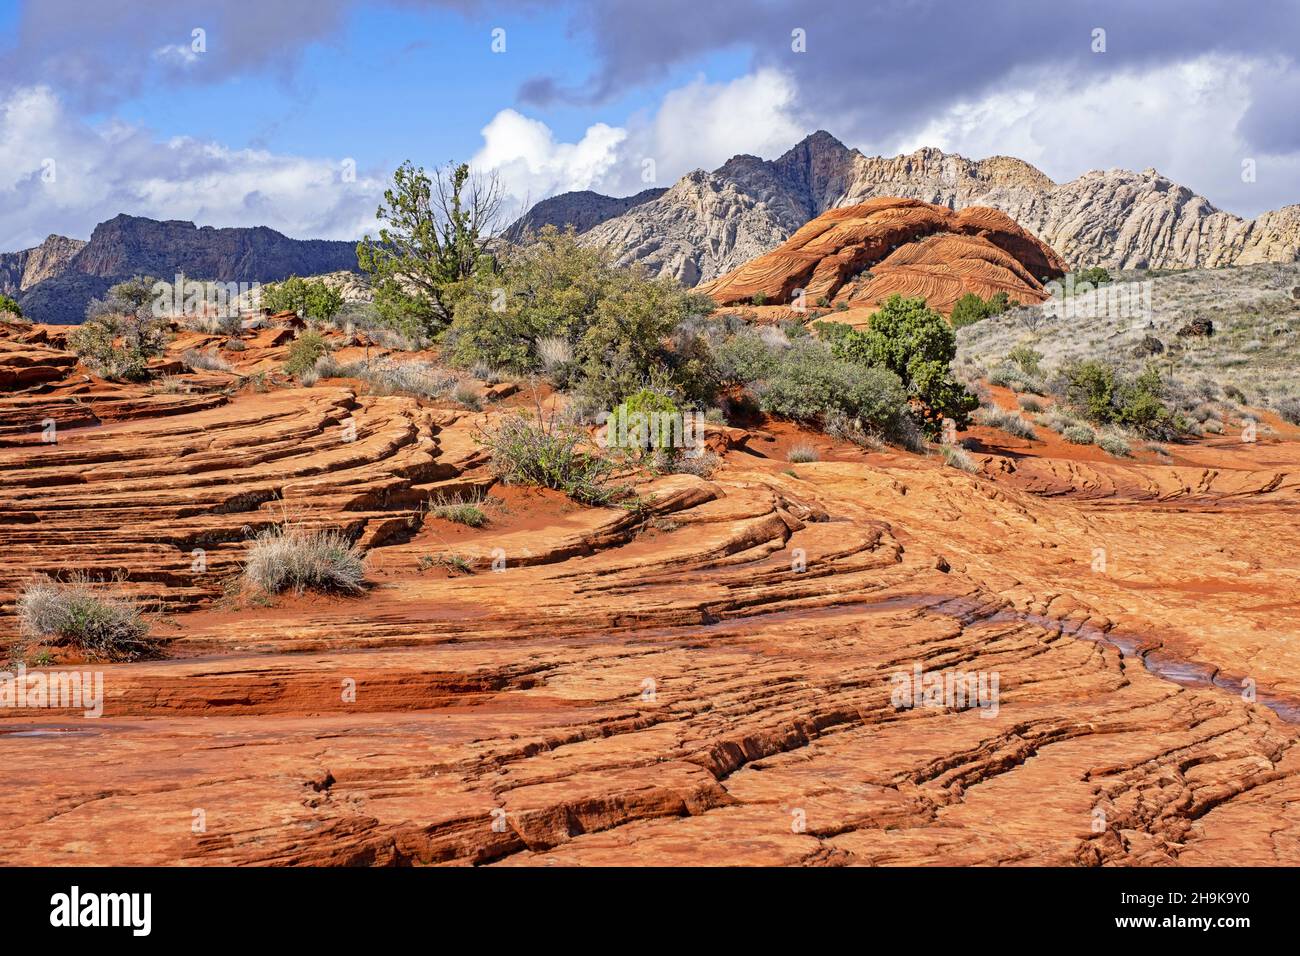 Layered Navajo sandstone of the Red Mountains in Snow Canyon State Park, part of the Red Cliffs Desert Reserve, Washington, Utah, United States, USA Stock Photo